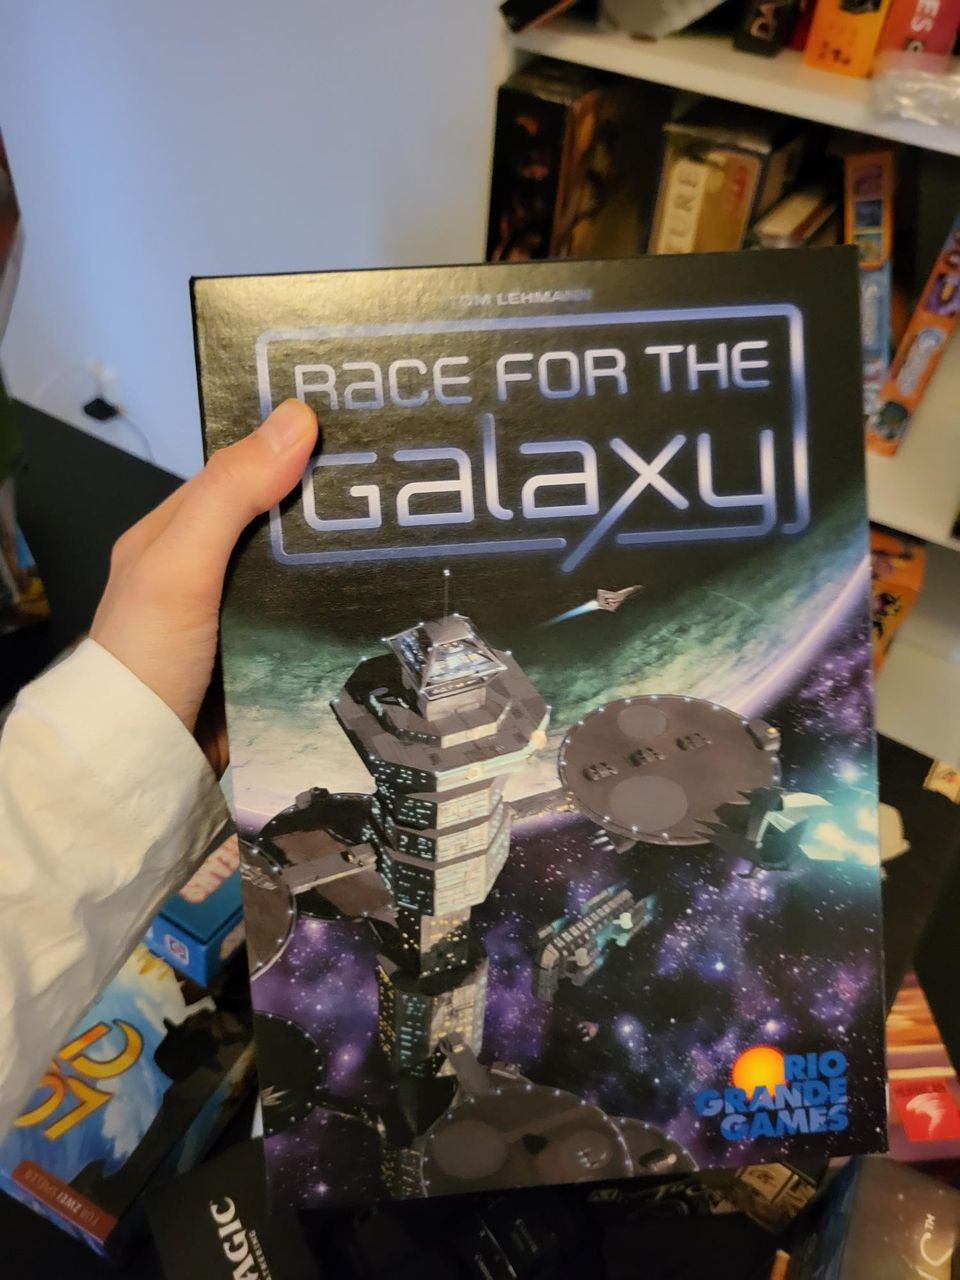 Race for the galexy